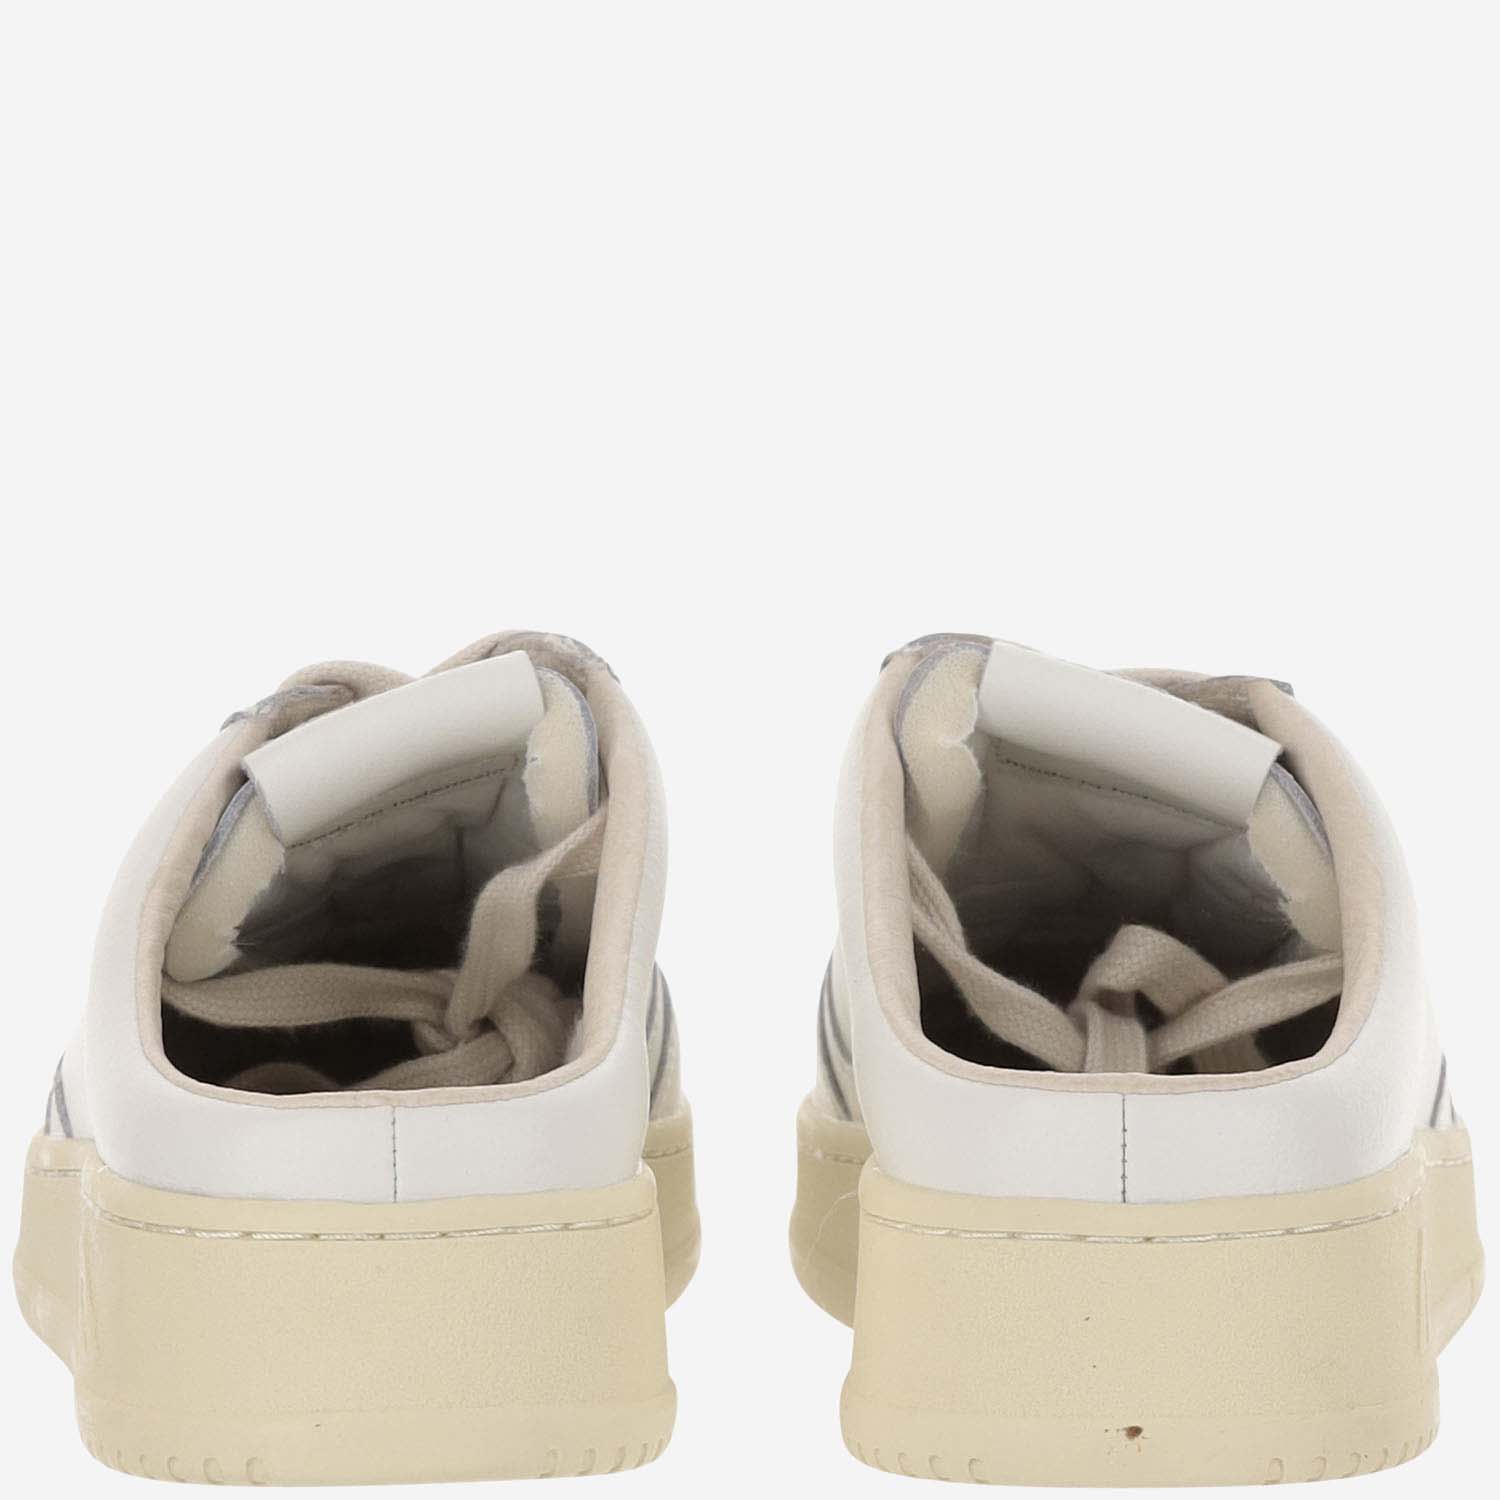 Shop Autry Medalist Mule Low Leather Sneakers